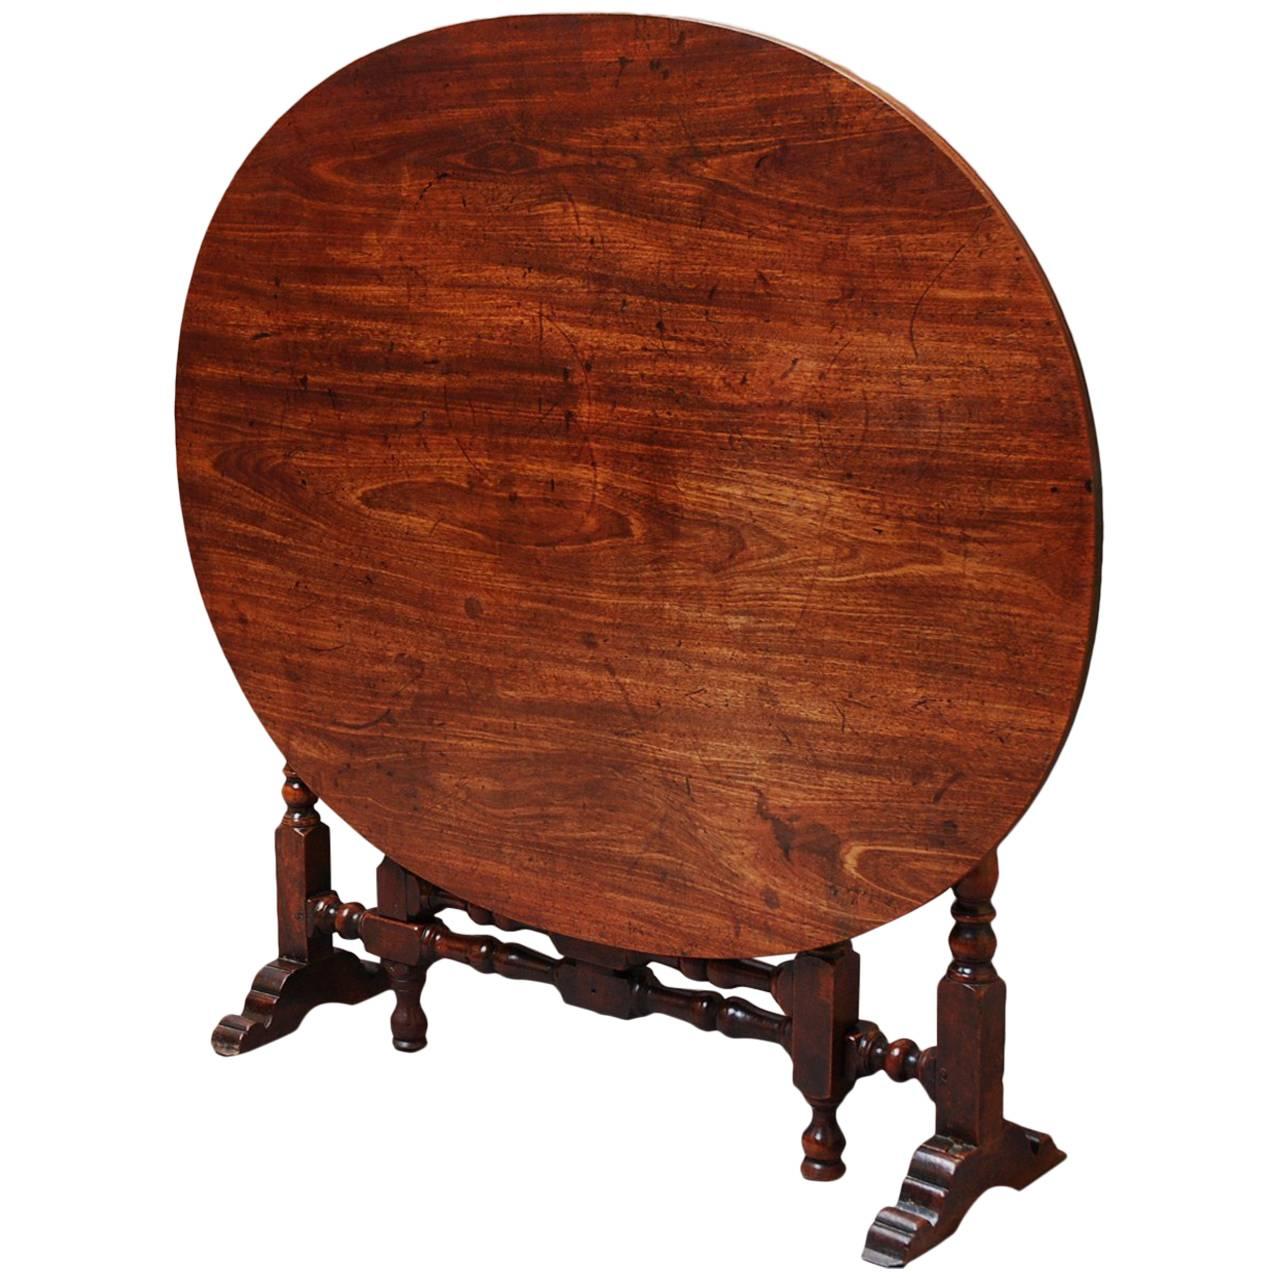 Rare Late 17th Century Yew Wood Coaching Table with Later Mahogany Top